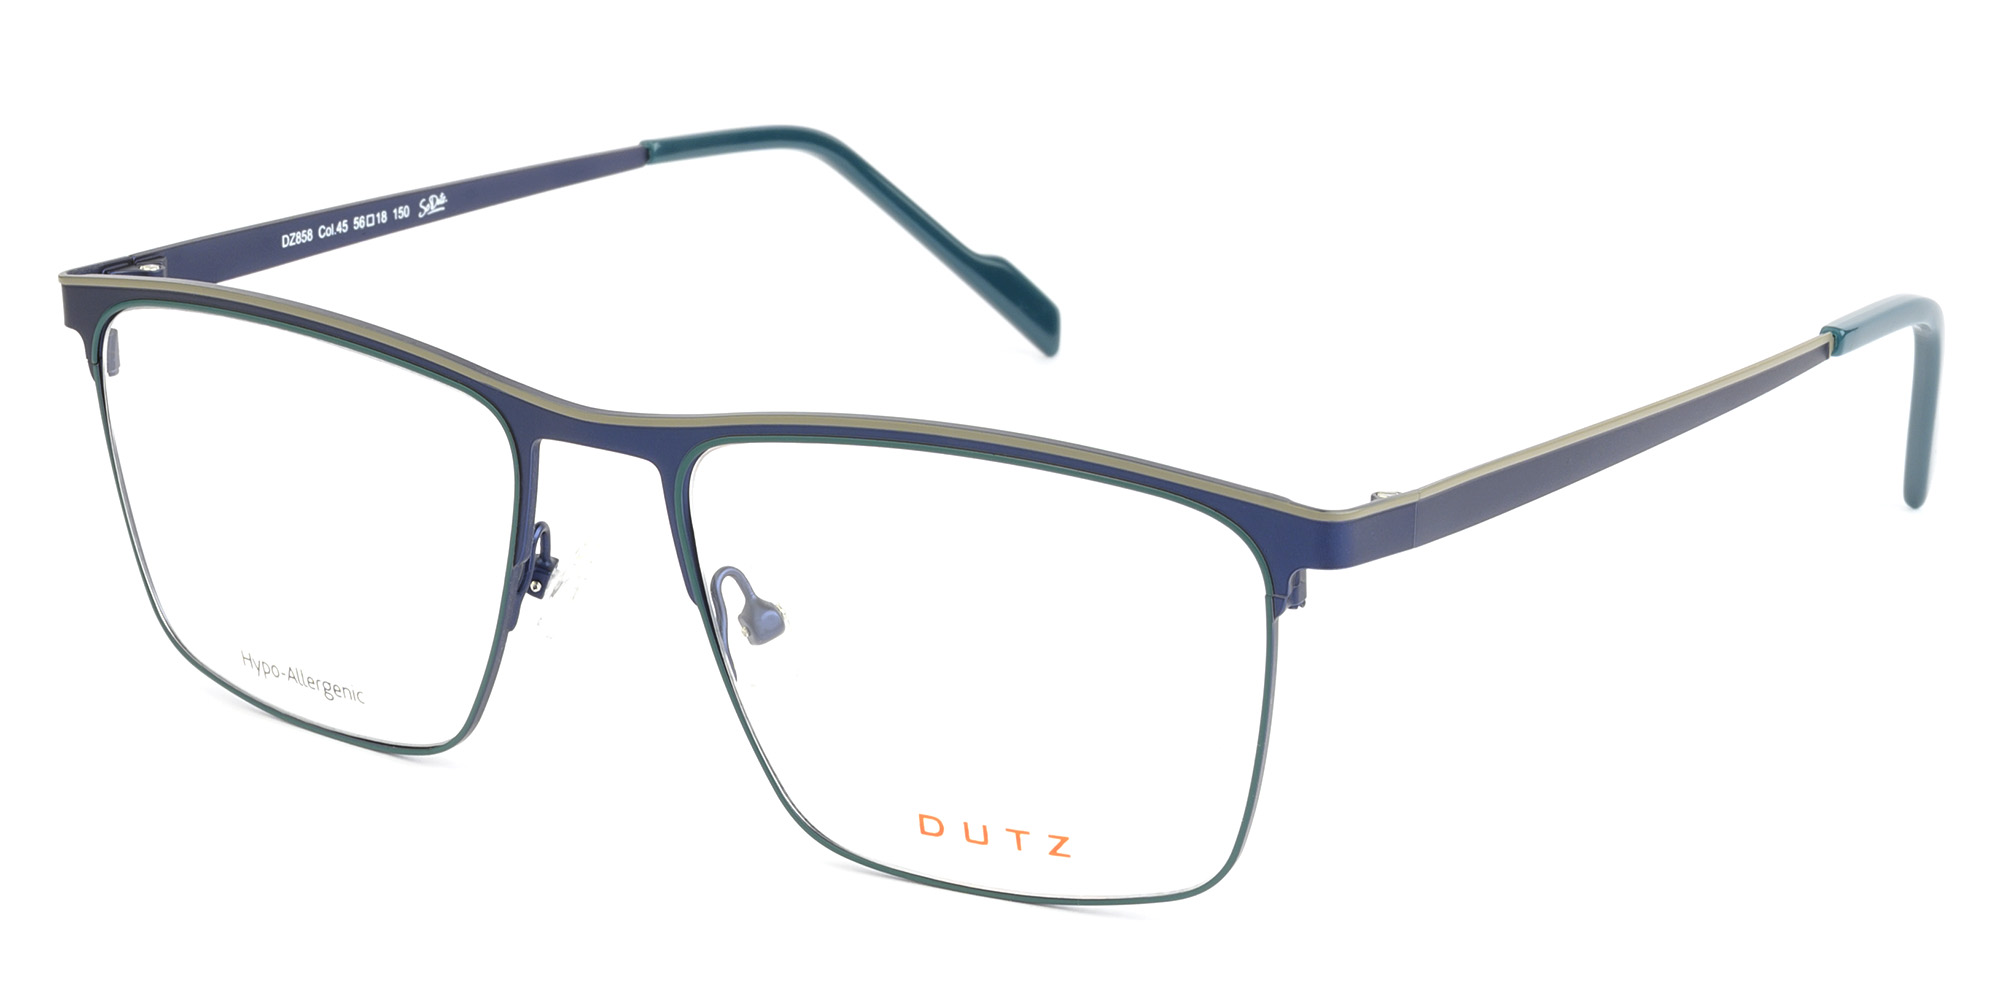 Wide, rectangular, blue & petrol combined with grey, metallic frame and temples and petrol blue acetate temple tips